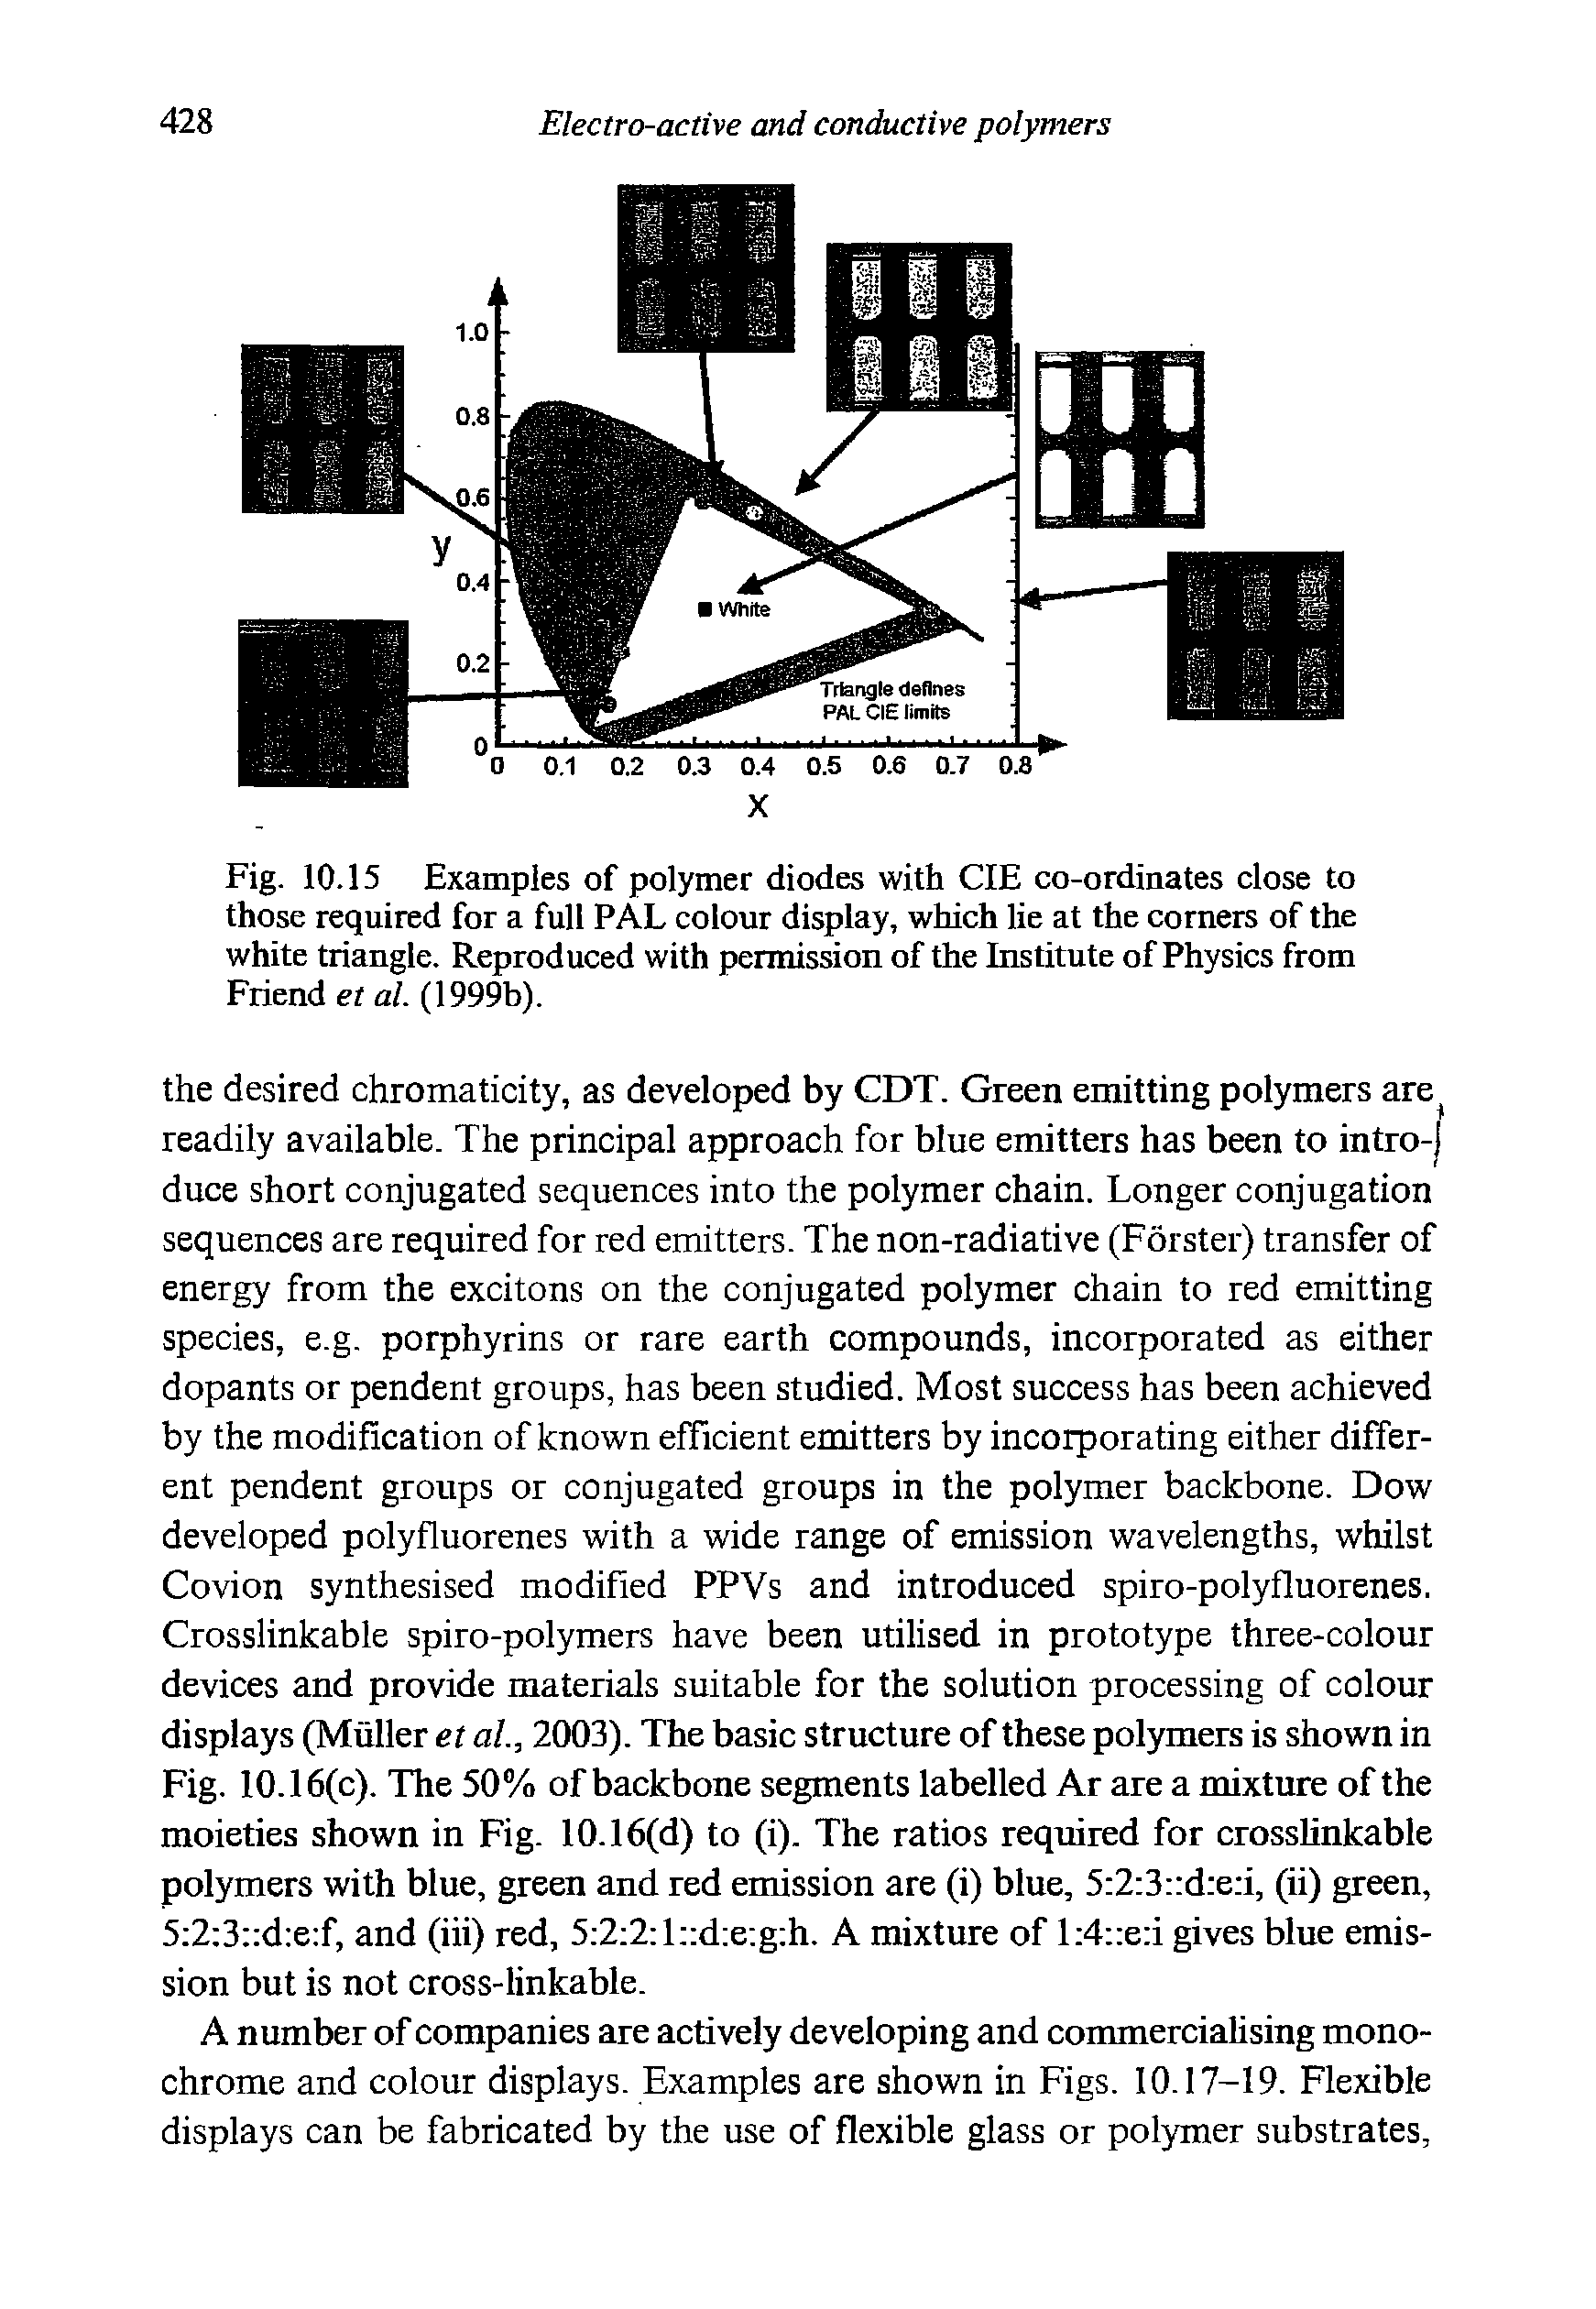 Fig. 10.15 Examples of polymer diodes with CIE co-ordinates close to those required for a full PAL colour display, which lie at the corners of the white triangle. Reproduced with permission of the Institute of Physics from Friend et al. (1999b).